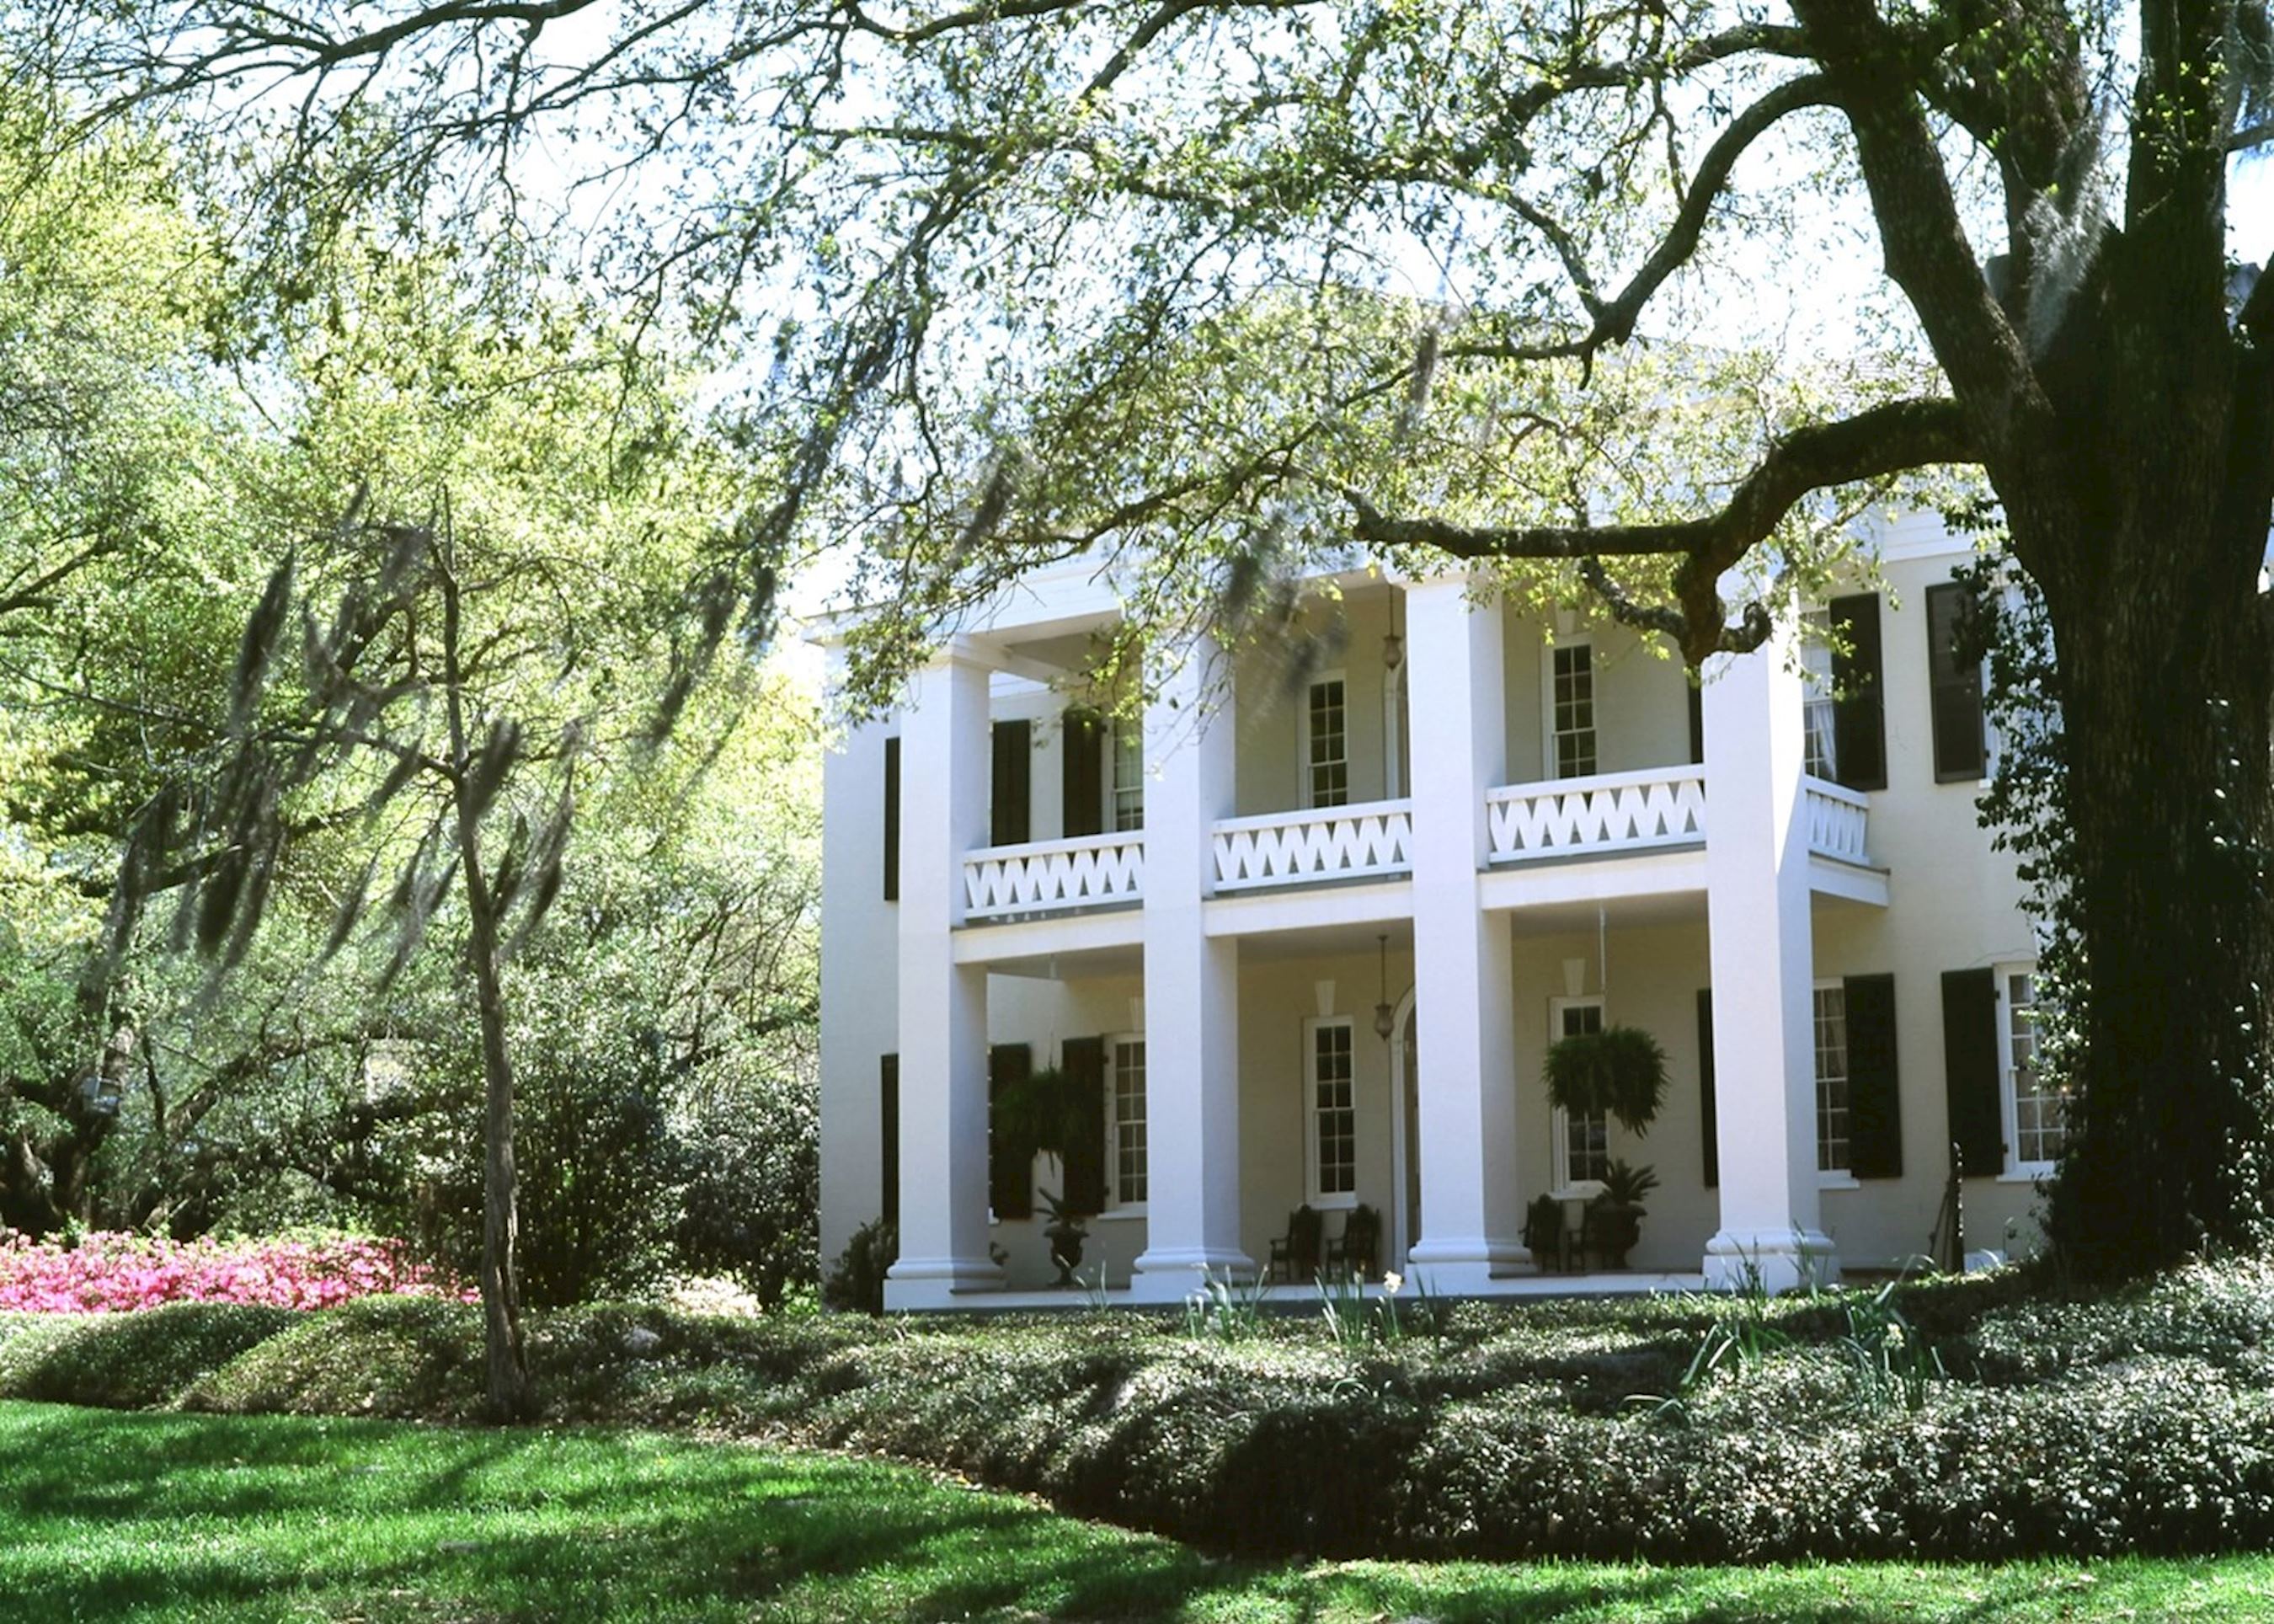 Plantation homes of the Deep South | Audley Travel